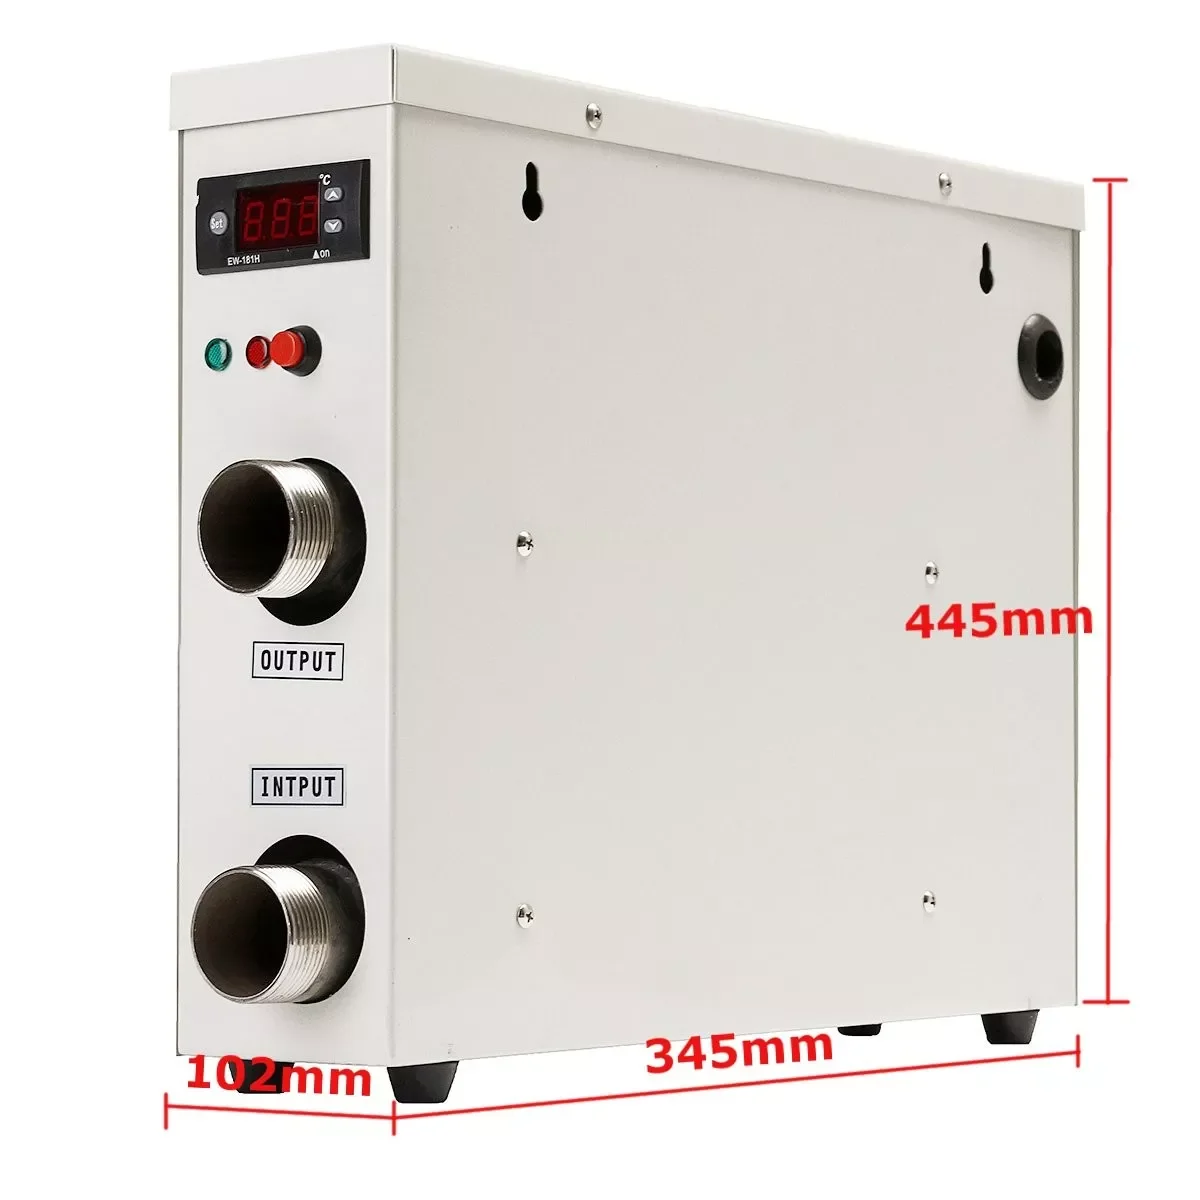 11kW 220V Electric Digital Water Heater Thermostat for Swimming Pool SPA Hot Tub Bath Water Heating Water enlarge